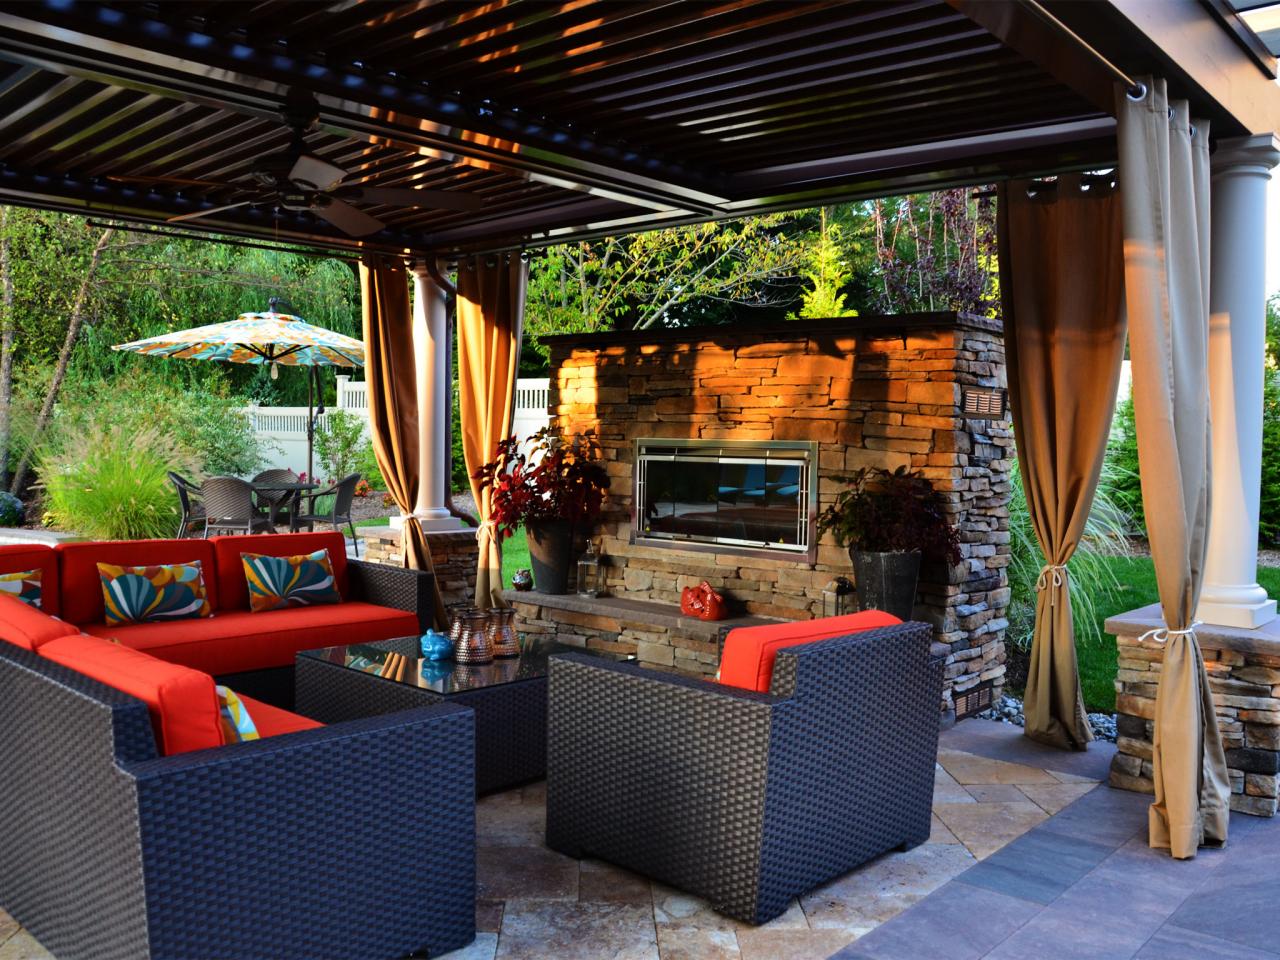 Budgeting An Outdoor Fireplace, How Much Does A Patio Fireplace Cost